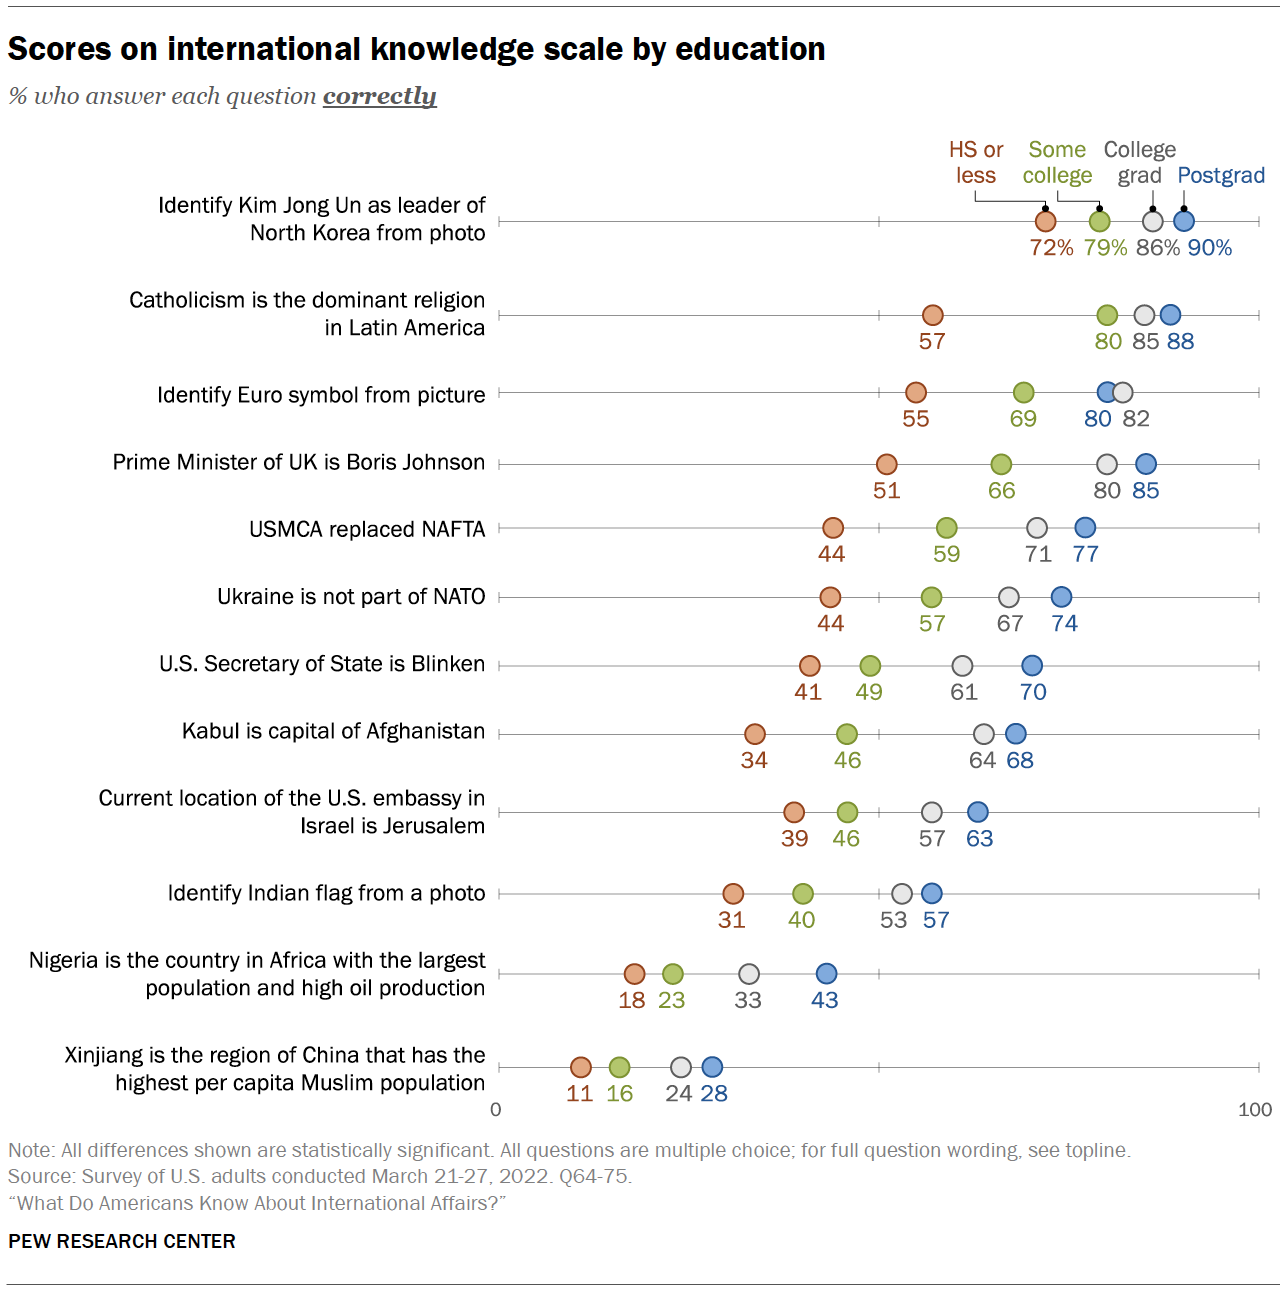 Chart shows scores on international knowledge scale by education